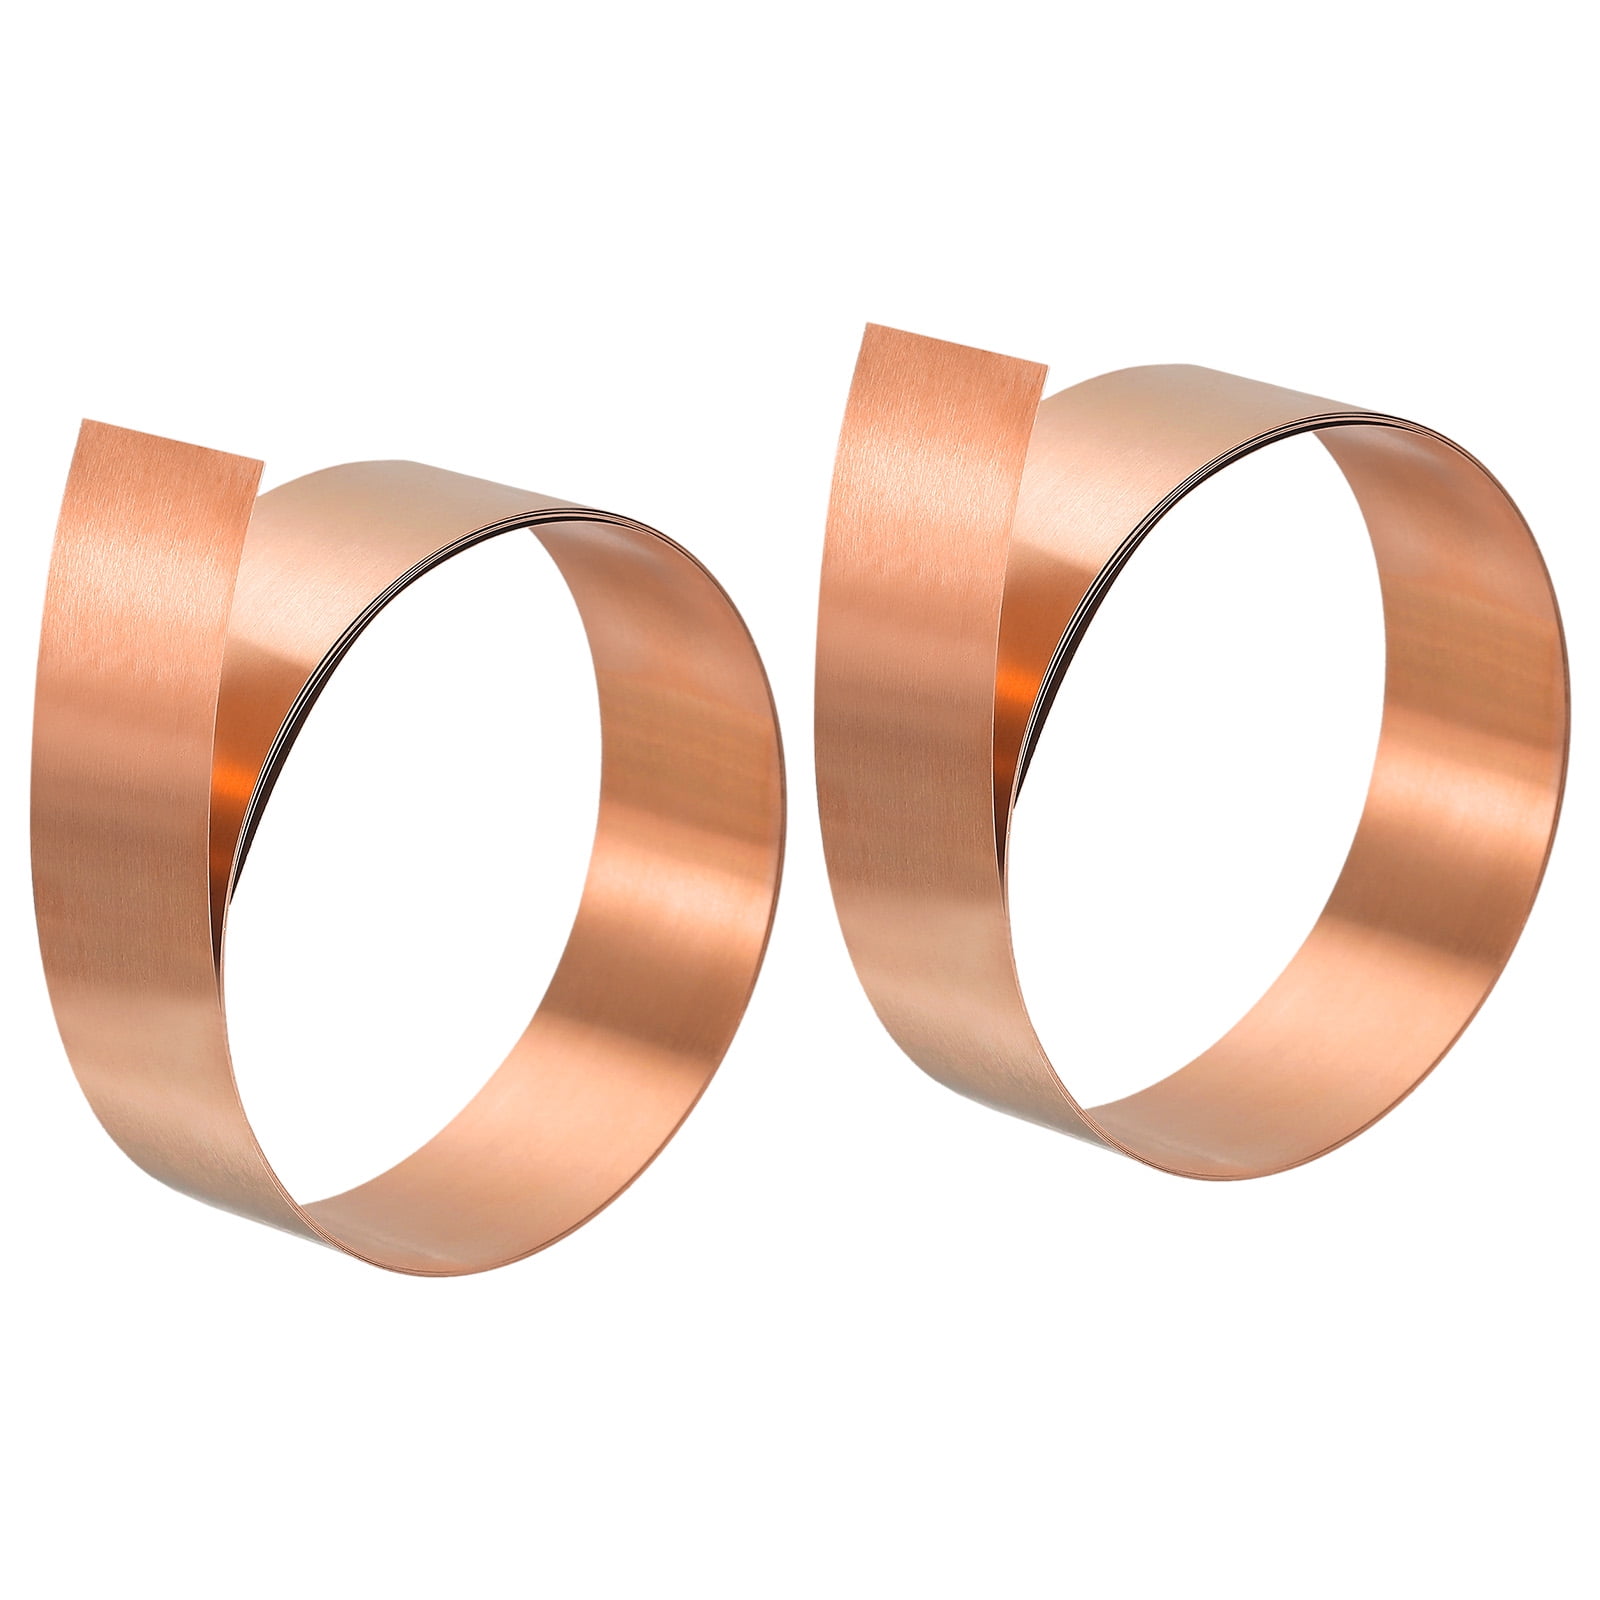 Uxcell Copper Thin Foil Roll Sheet, 0.2x15x1000mm Pure Copper Foil Sheet Roll Copper Strip, Red Copper, Bronze